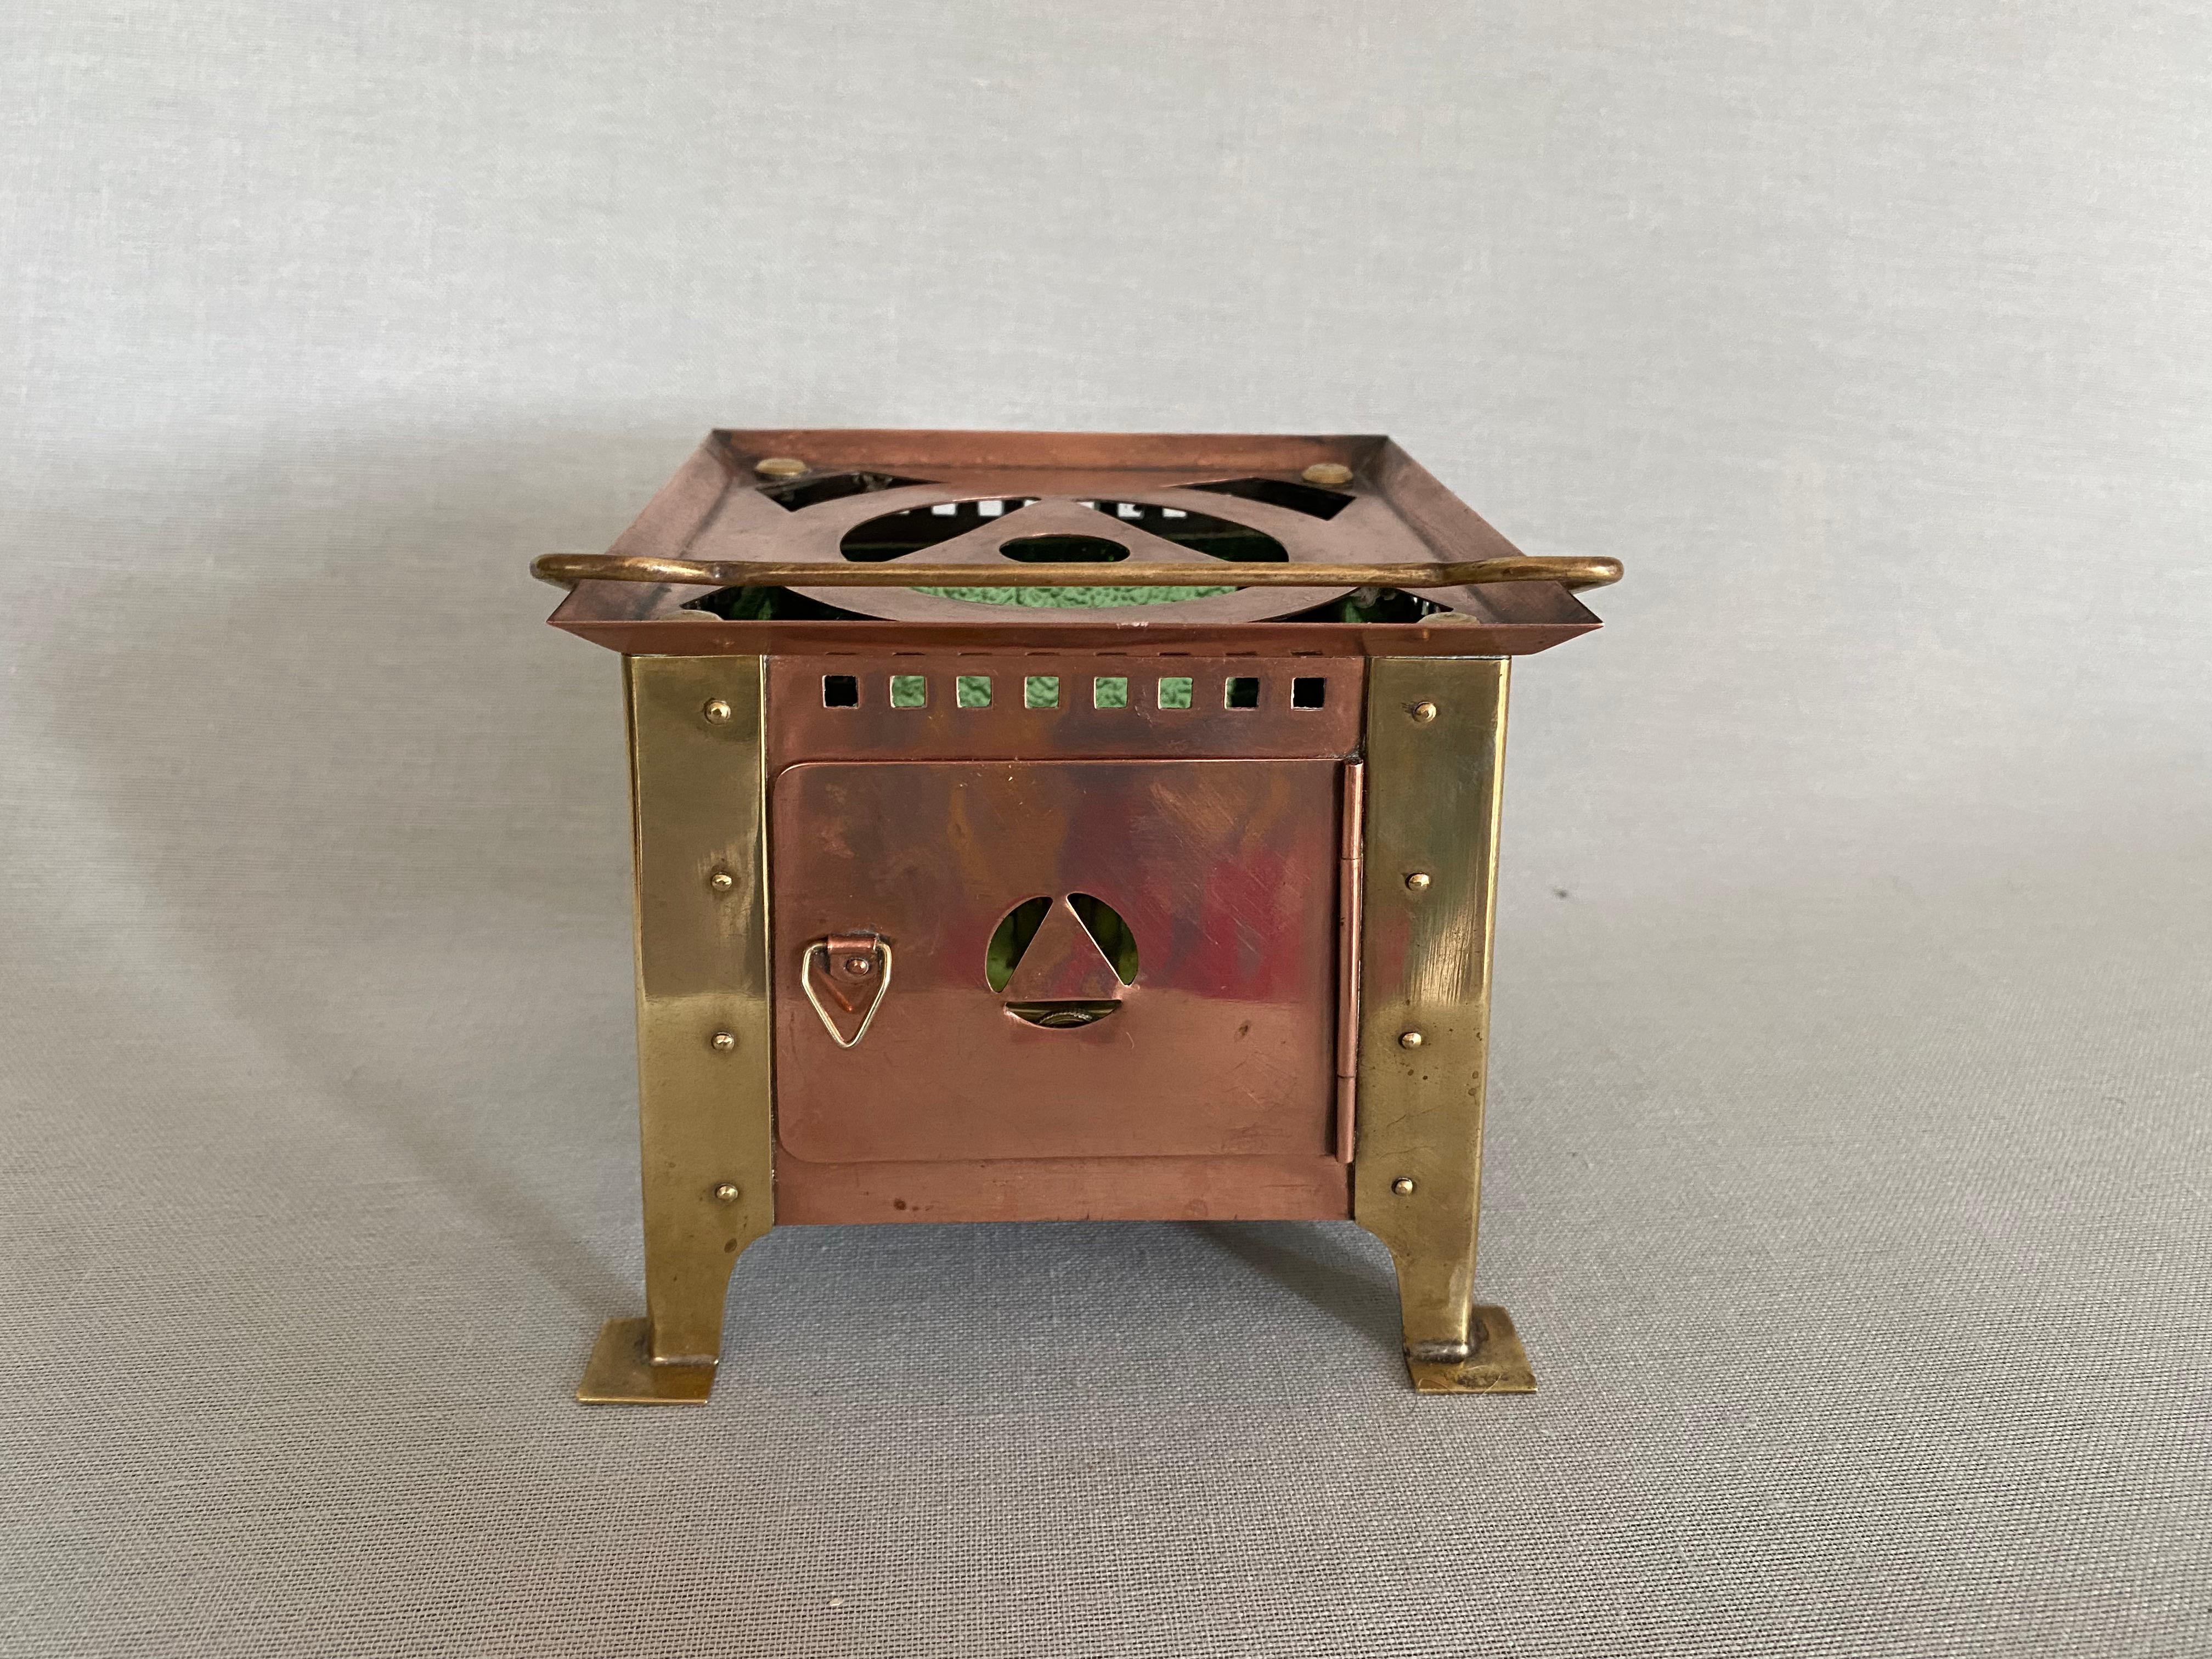 Warmer from the Württembergische Metallwarenfabrik, Geislingen, early 20th century.
The warmer is in a very neat and good condition. It is not only a collectable WMF object but can actually be used practically and well.
The warmer fascinates with